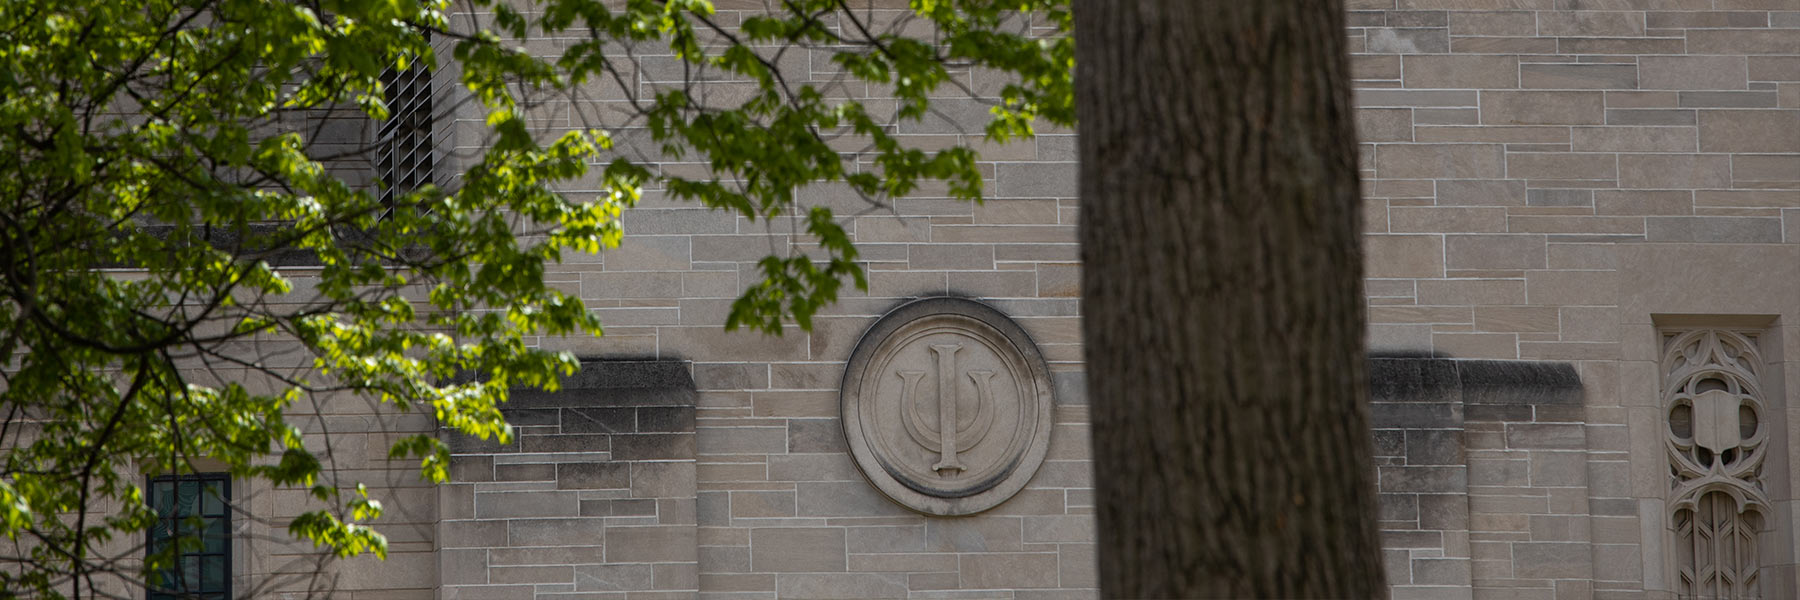 Tree branches in front of decorative elements on a limestone building, include the IU trident.